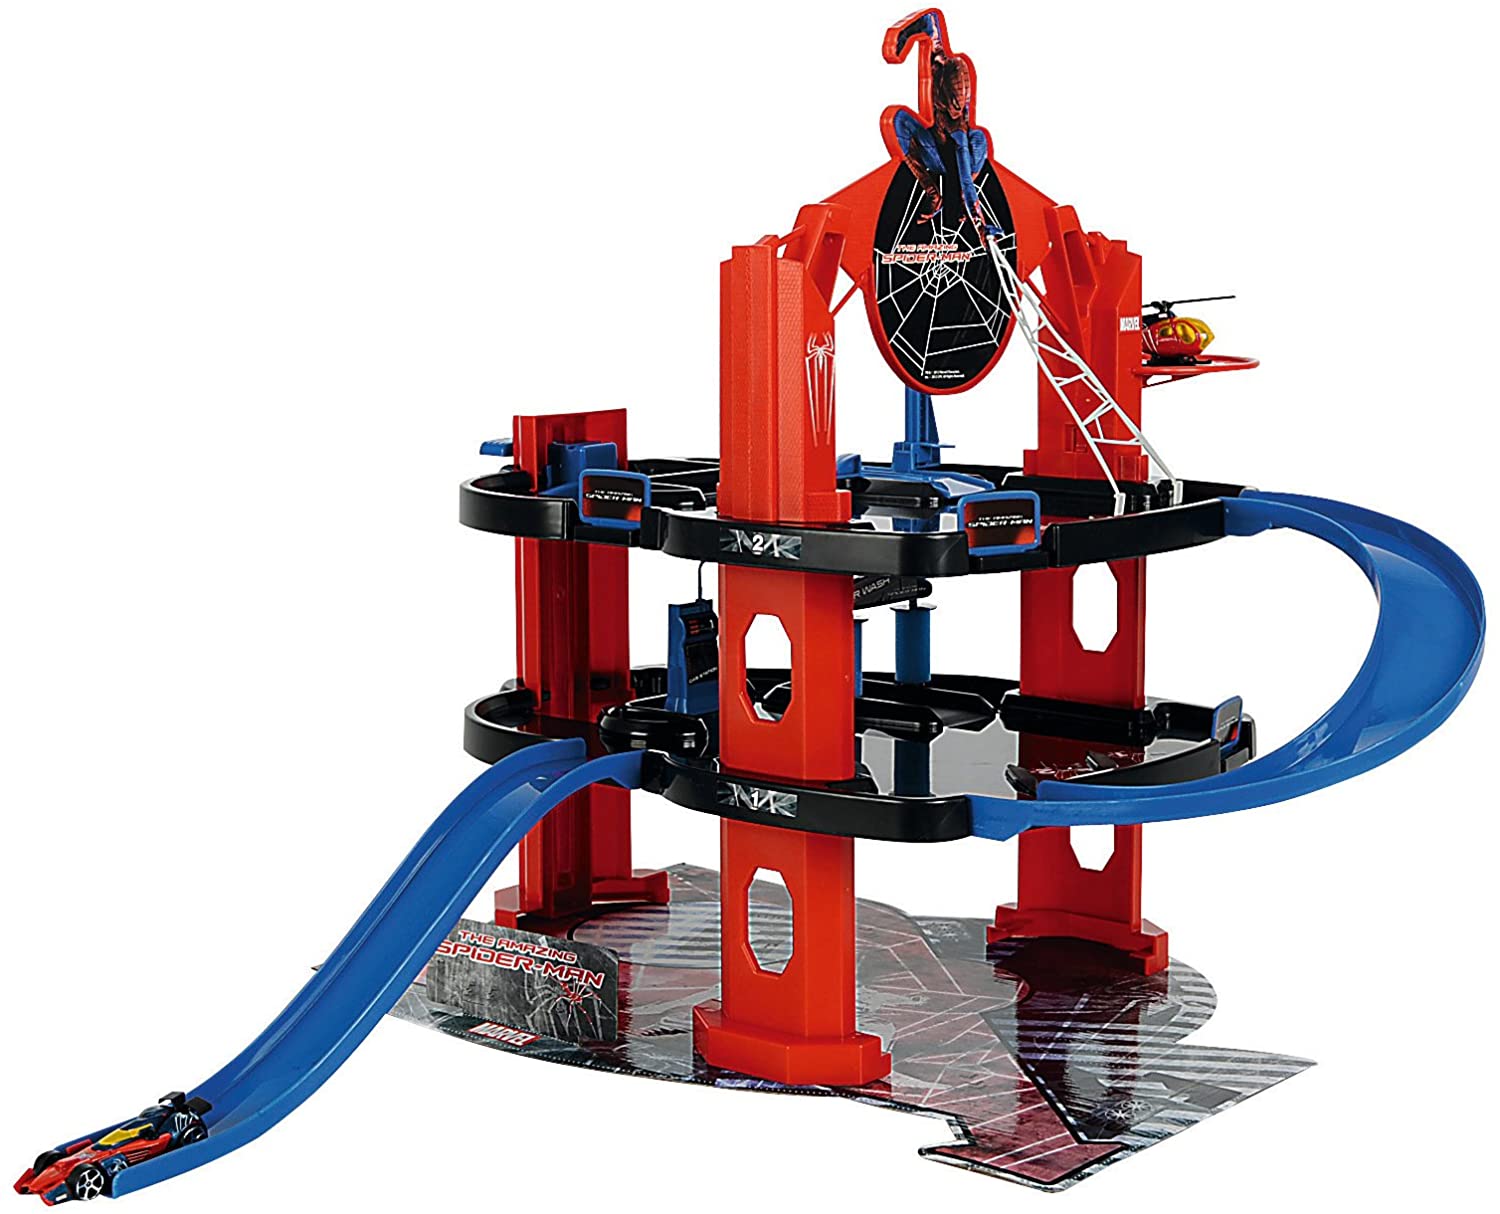 Majorette 213089720 The Amazing Spiderman Downtown Garage With 3 Tiers, 1 C